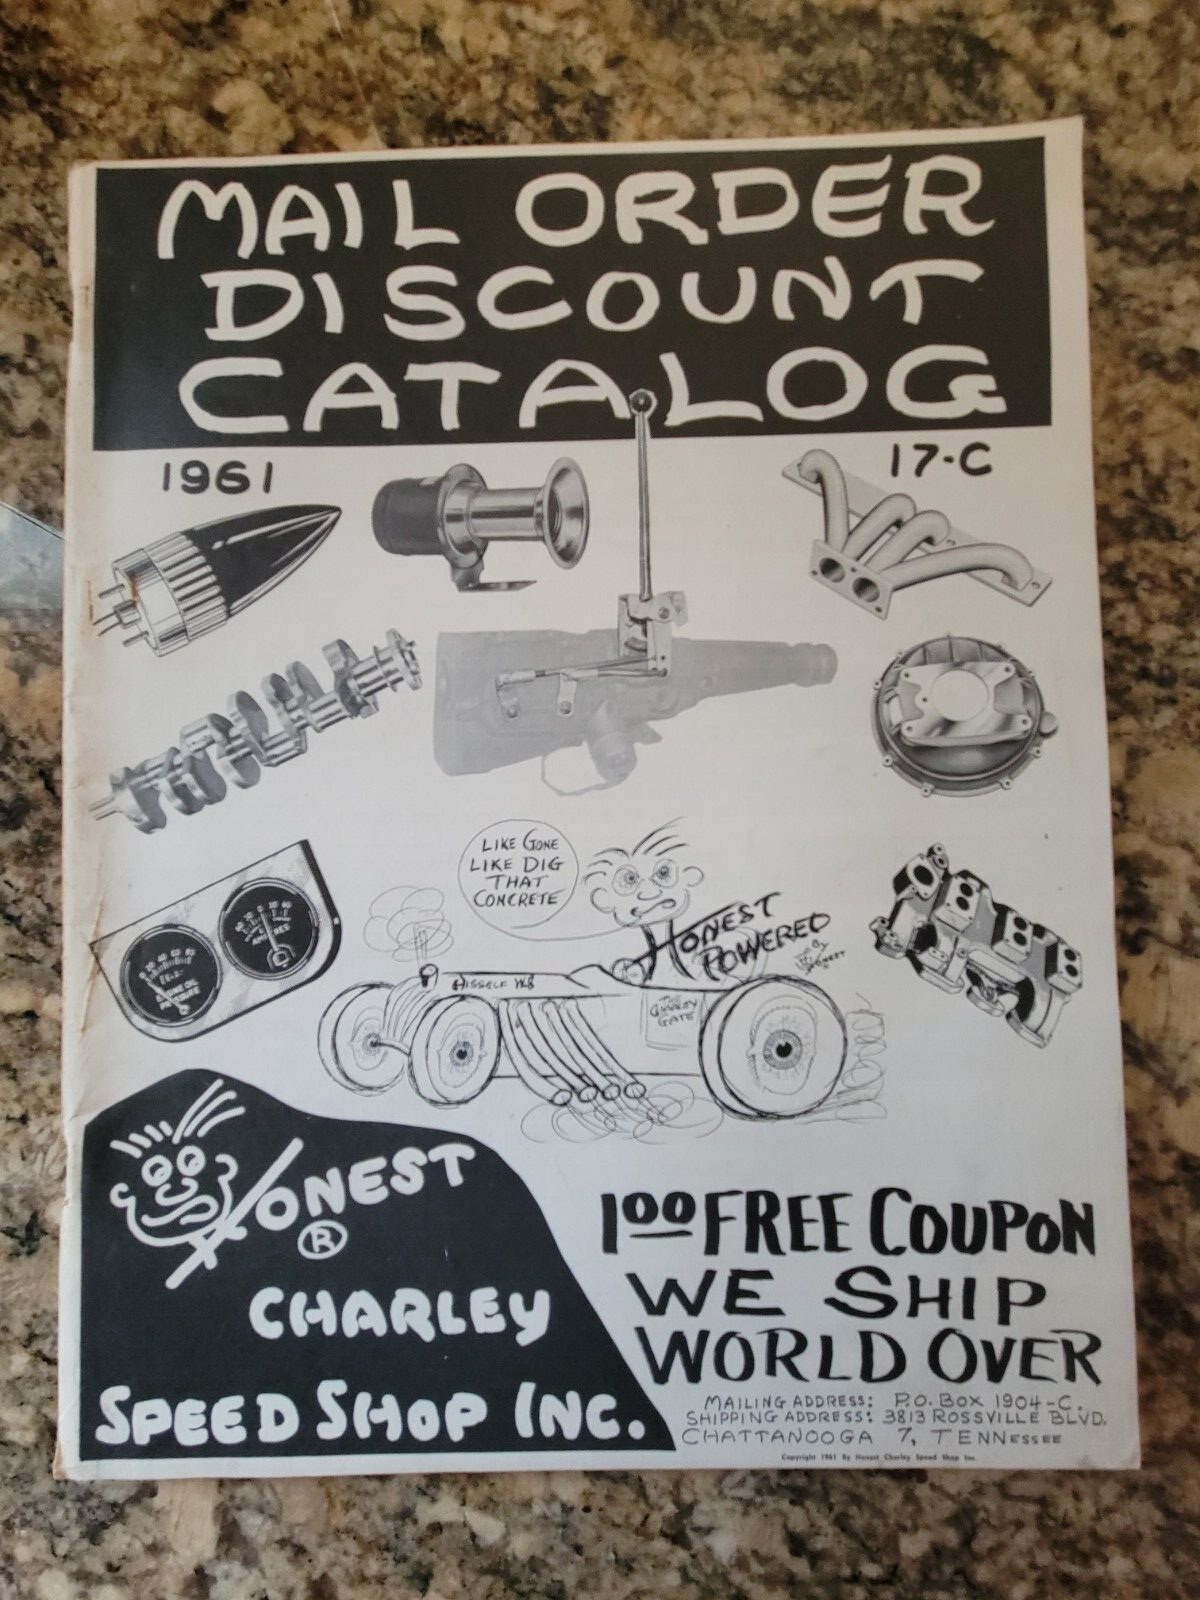 Honest Charley Speed Shop 1961 Auto Parts Mail Order Discount Catalog #17-C RARE